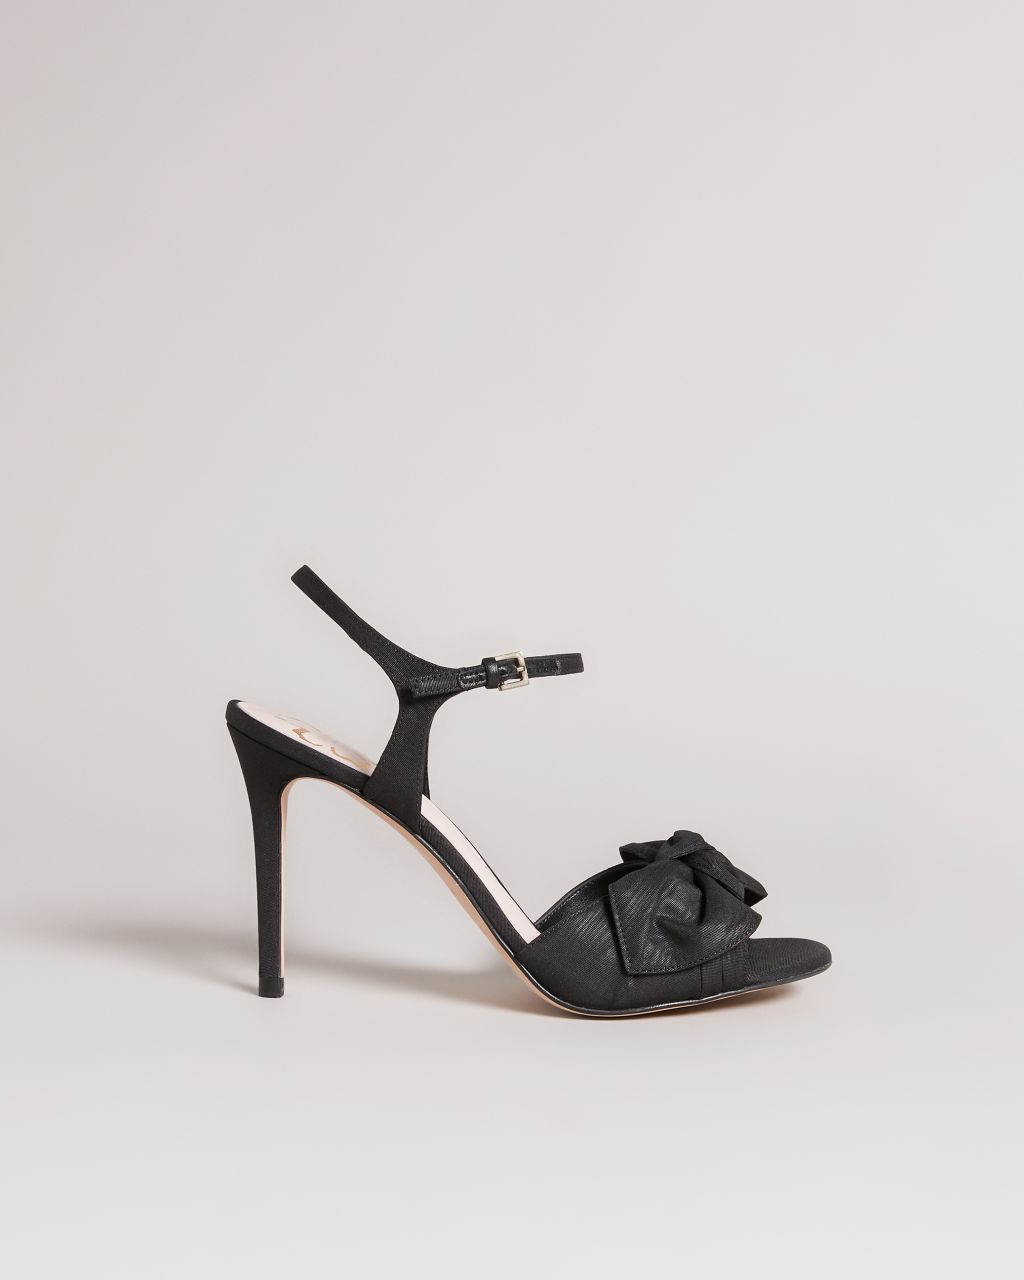 Ted Baker Women's Moire Satin Bow Heeled Sandals in Black, Heevia